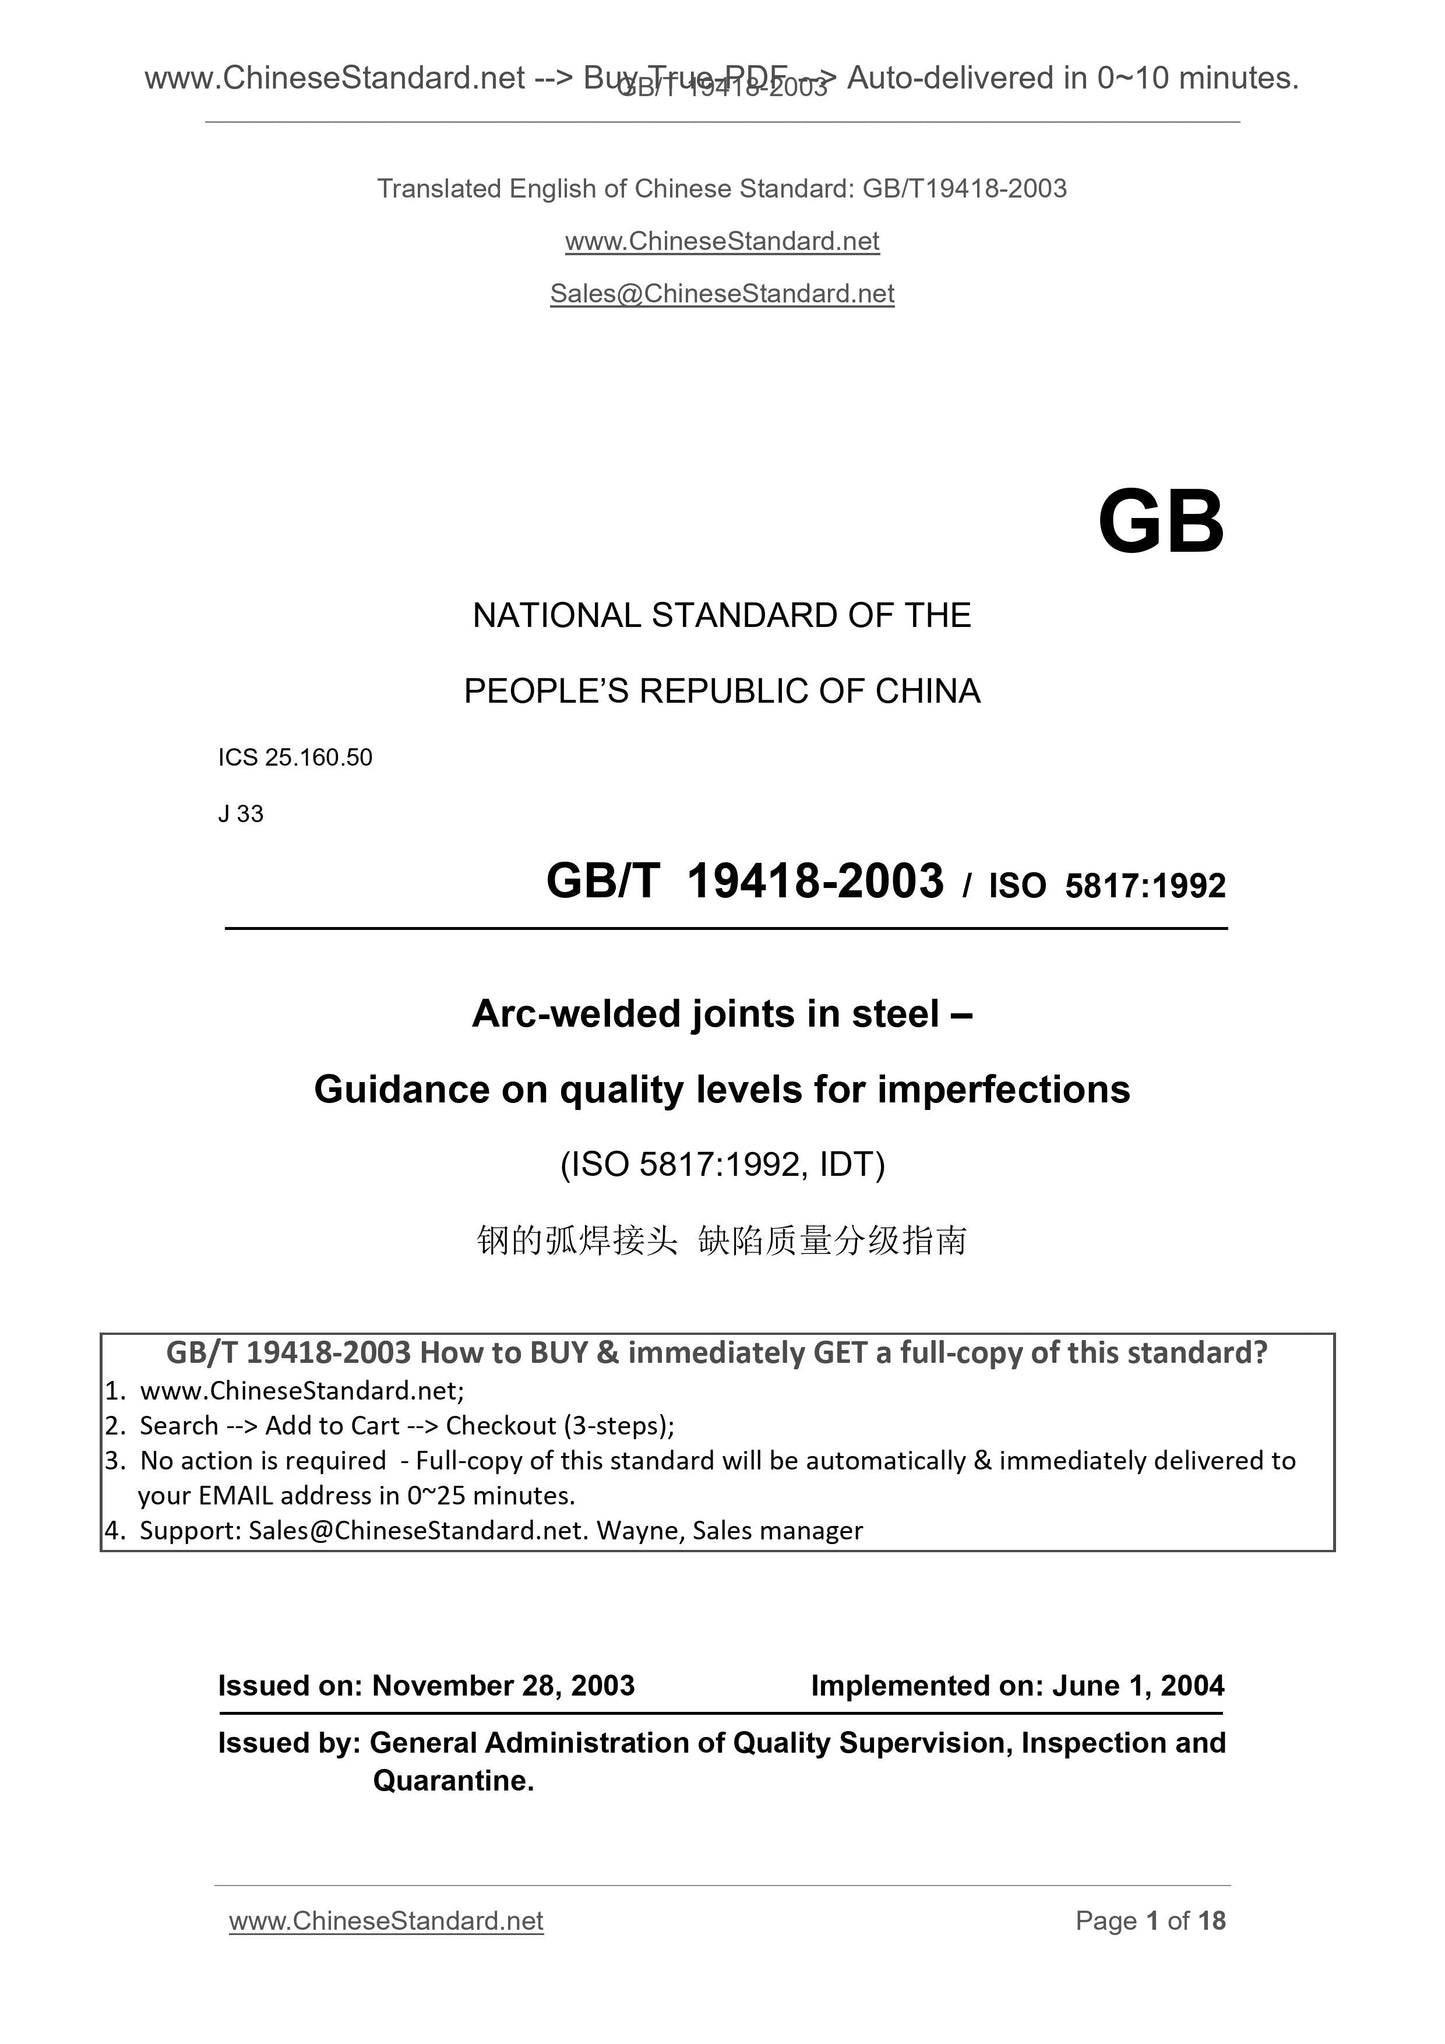 GB/T 19418-2003 Page 1